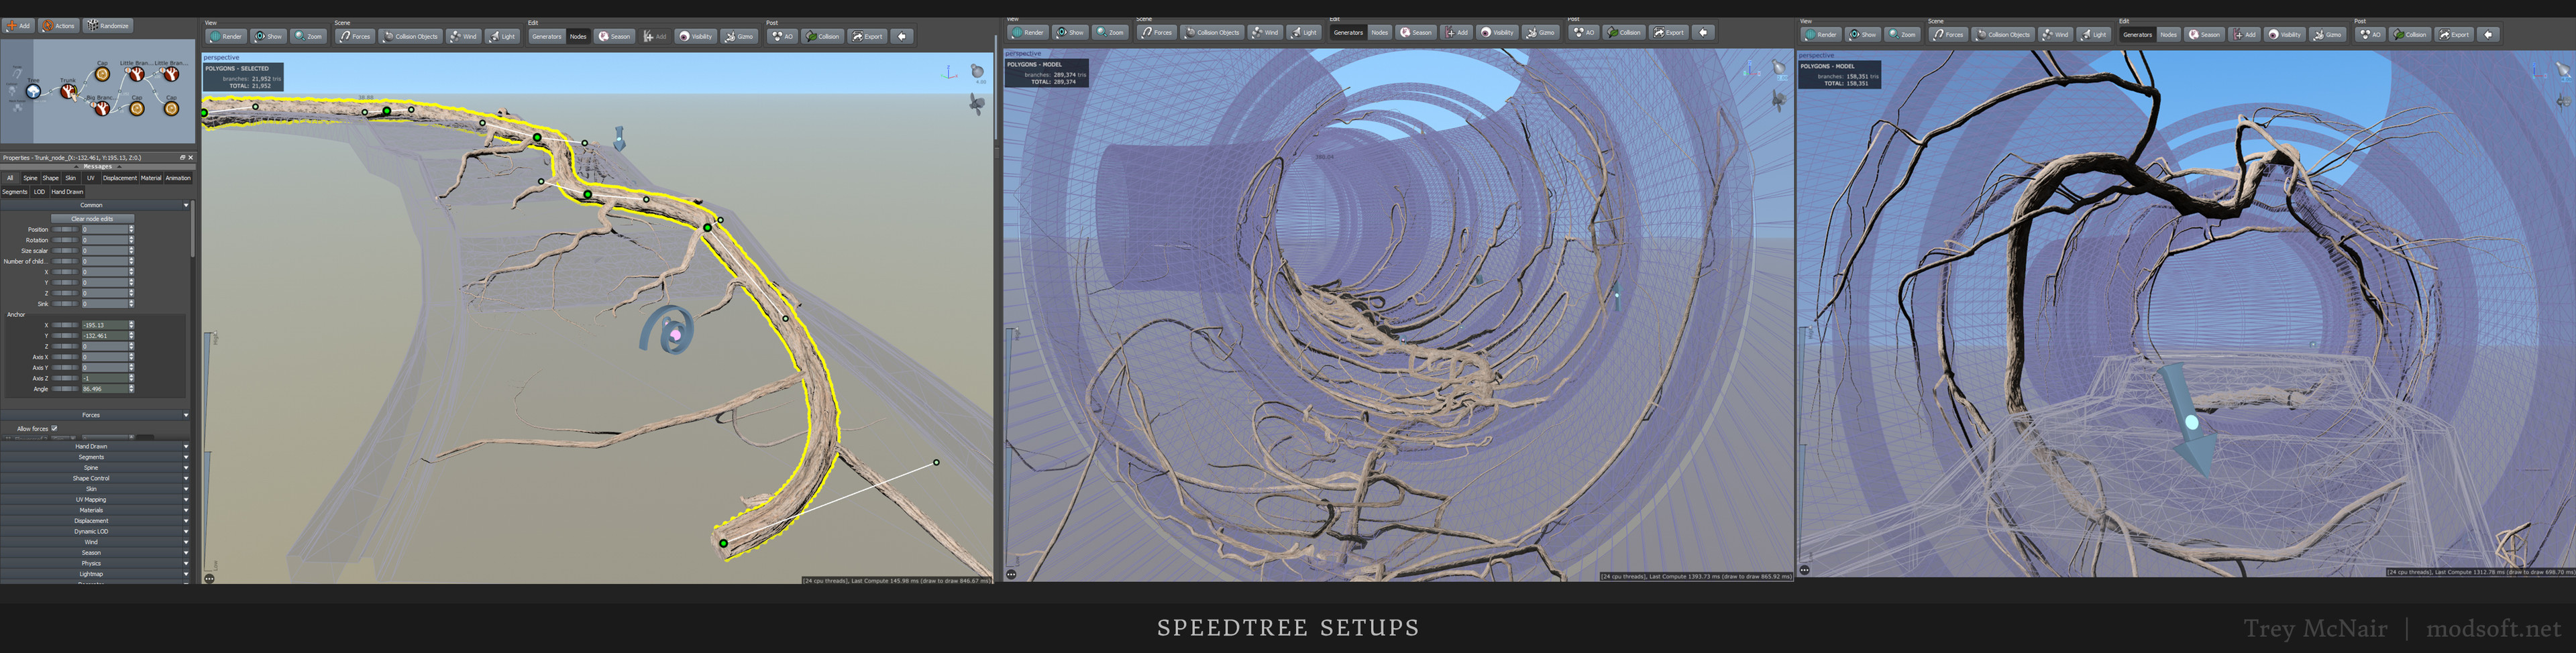 I used SpeedTree to generate the roots procedurally. For the stairway roots, the main trunk was drawn with a spline. the branches and other trunks were grown using a combination of mesh and magnet forces.